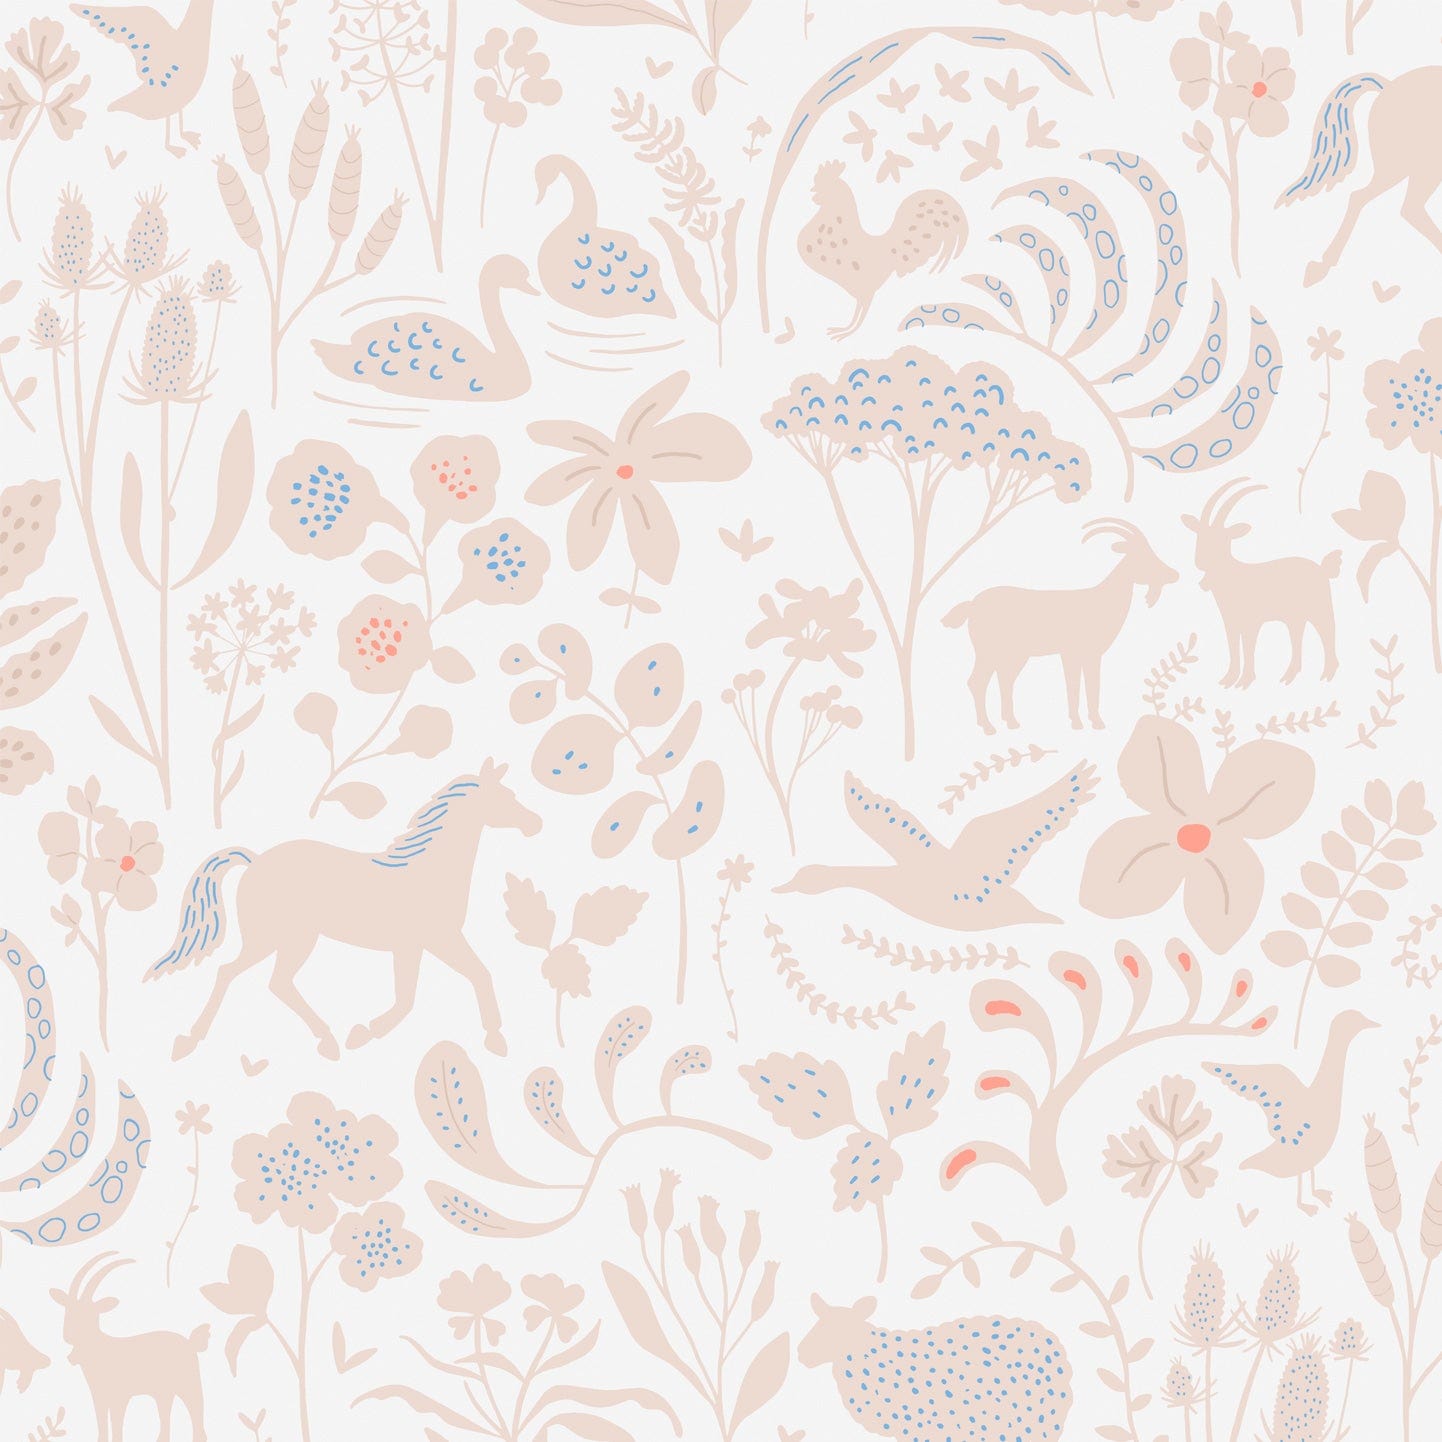 Wallpaper sample of ecru coloured flowers, leaves, swans, chickens, deers, ducks with a white background.